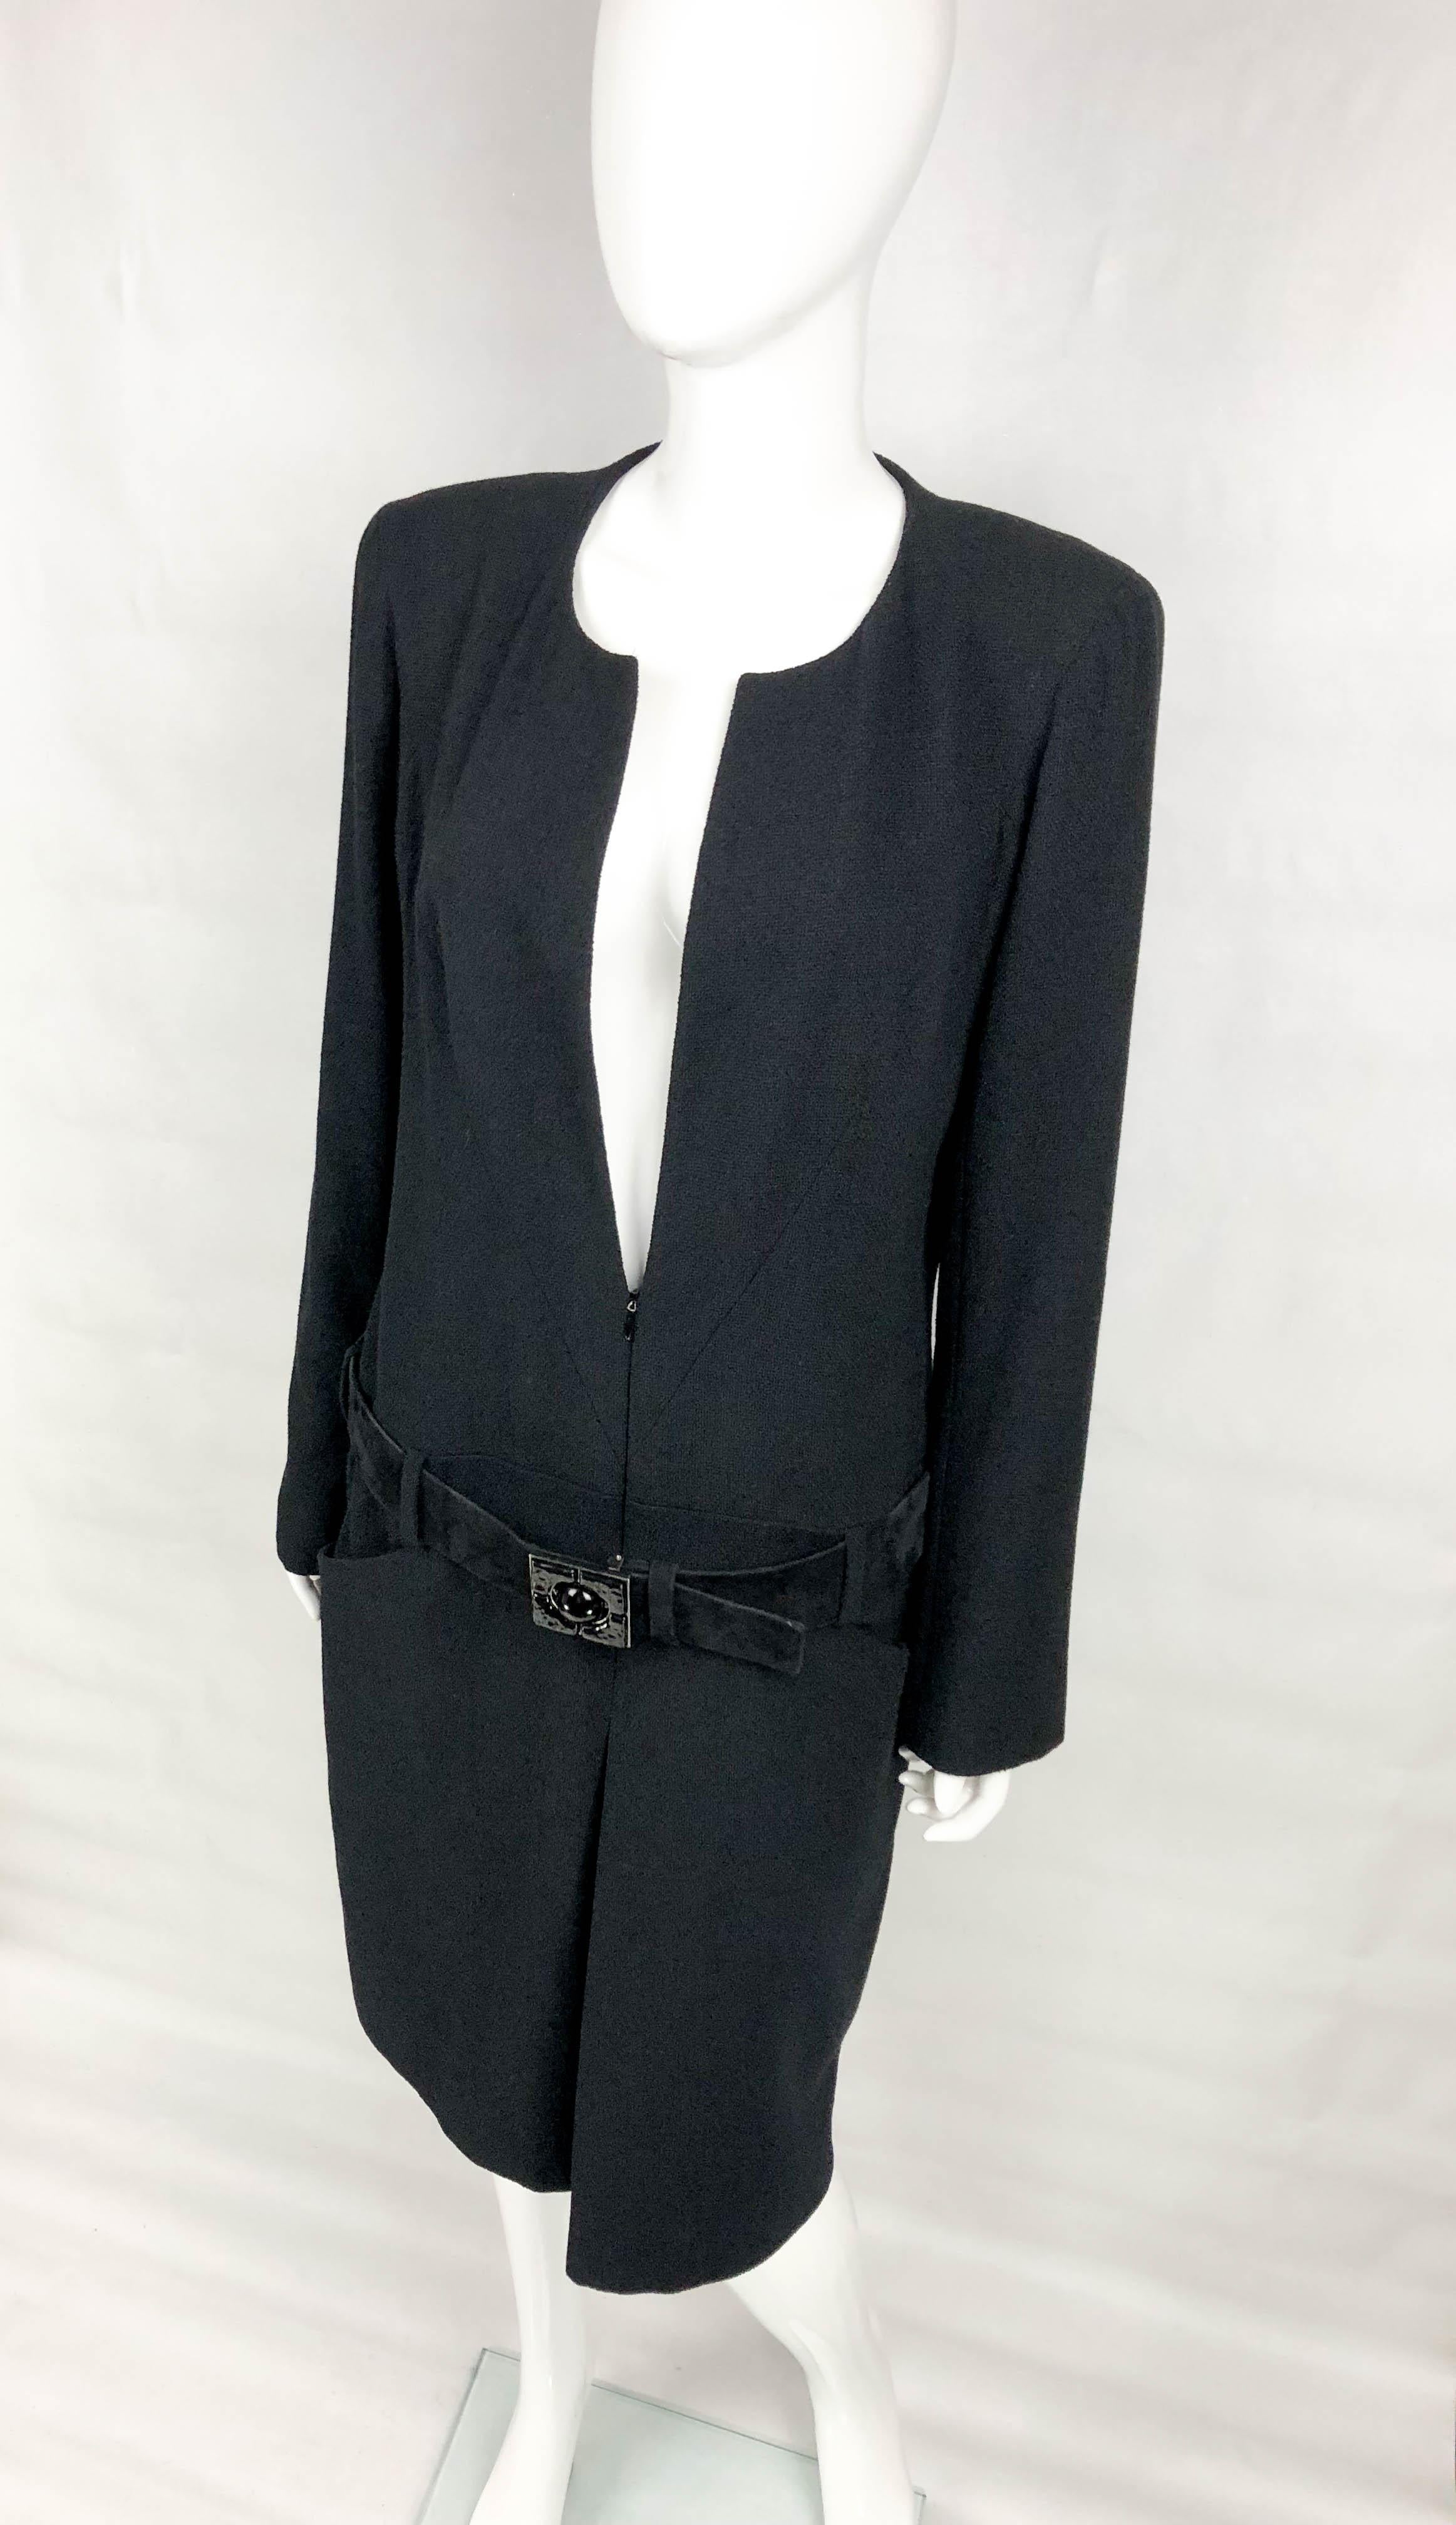 2009 Chanel Runway Look Black Wool Belted Dress / Coat (Large Size) For Sale 2